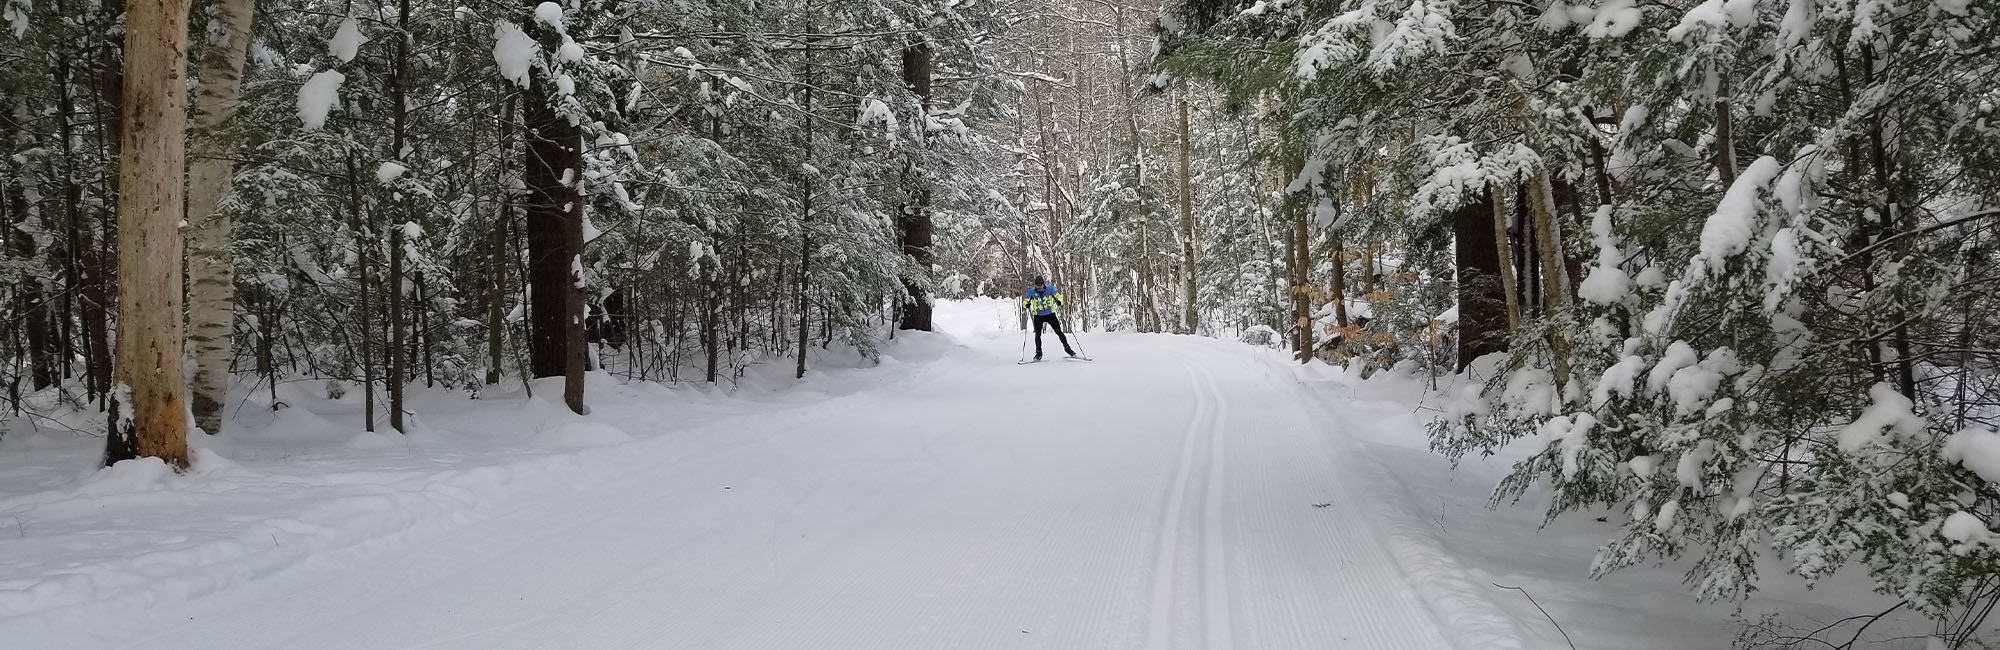 Man skate skiing on groomed cross country trail.